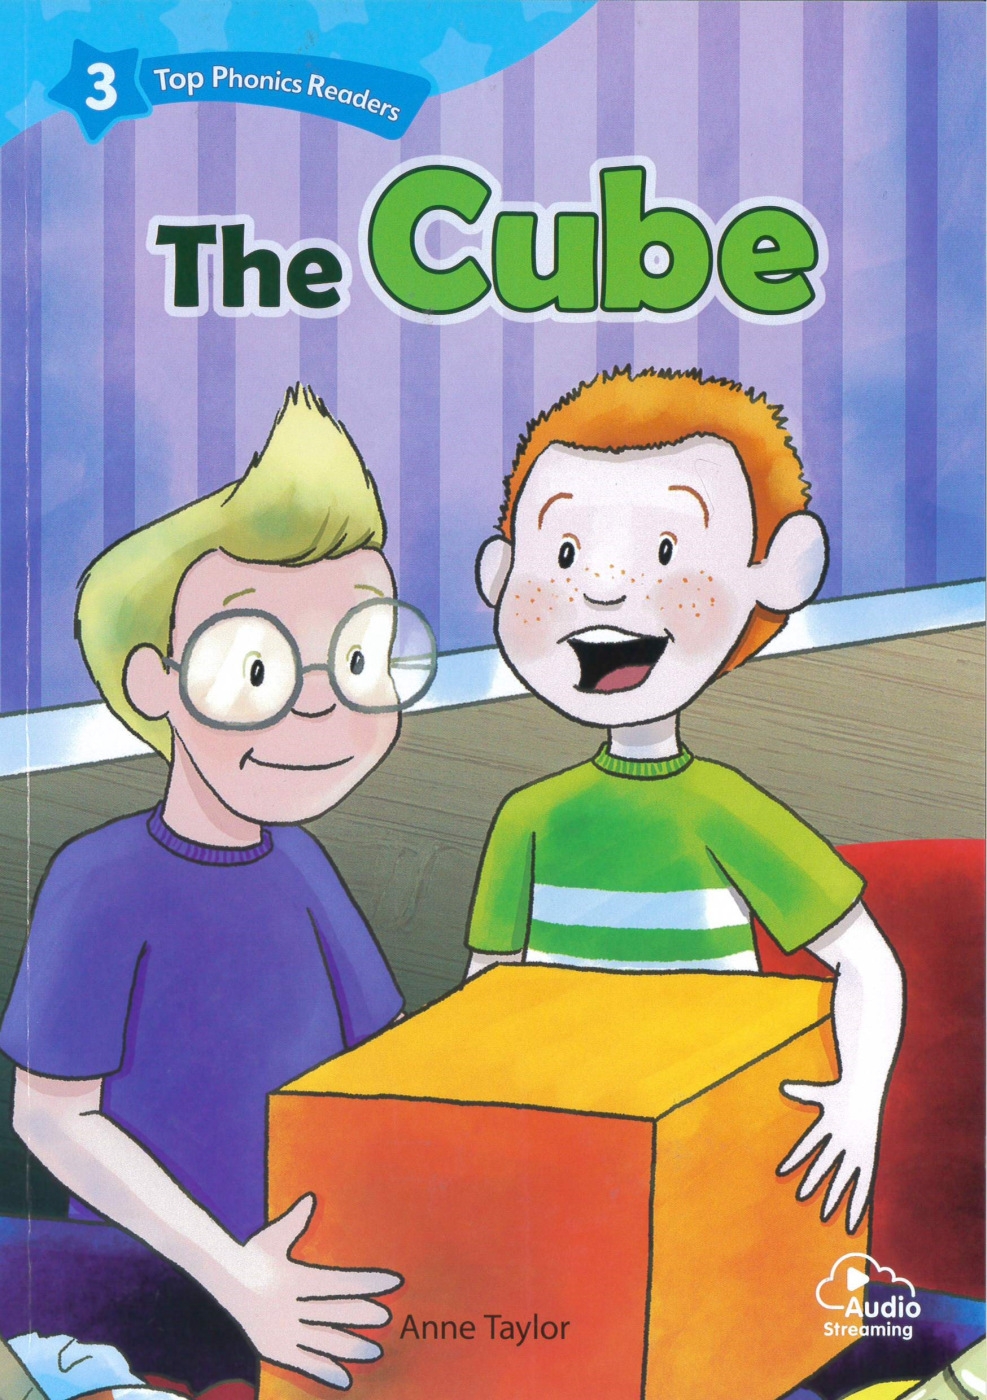 Top Phonics Readers 3：The Cube...